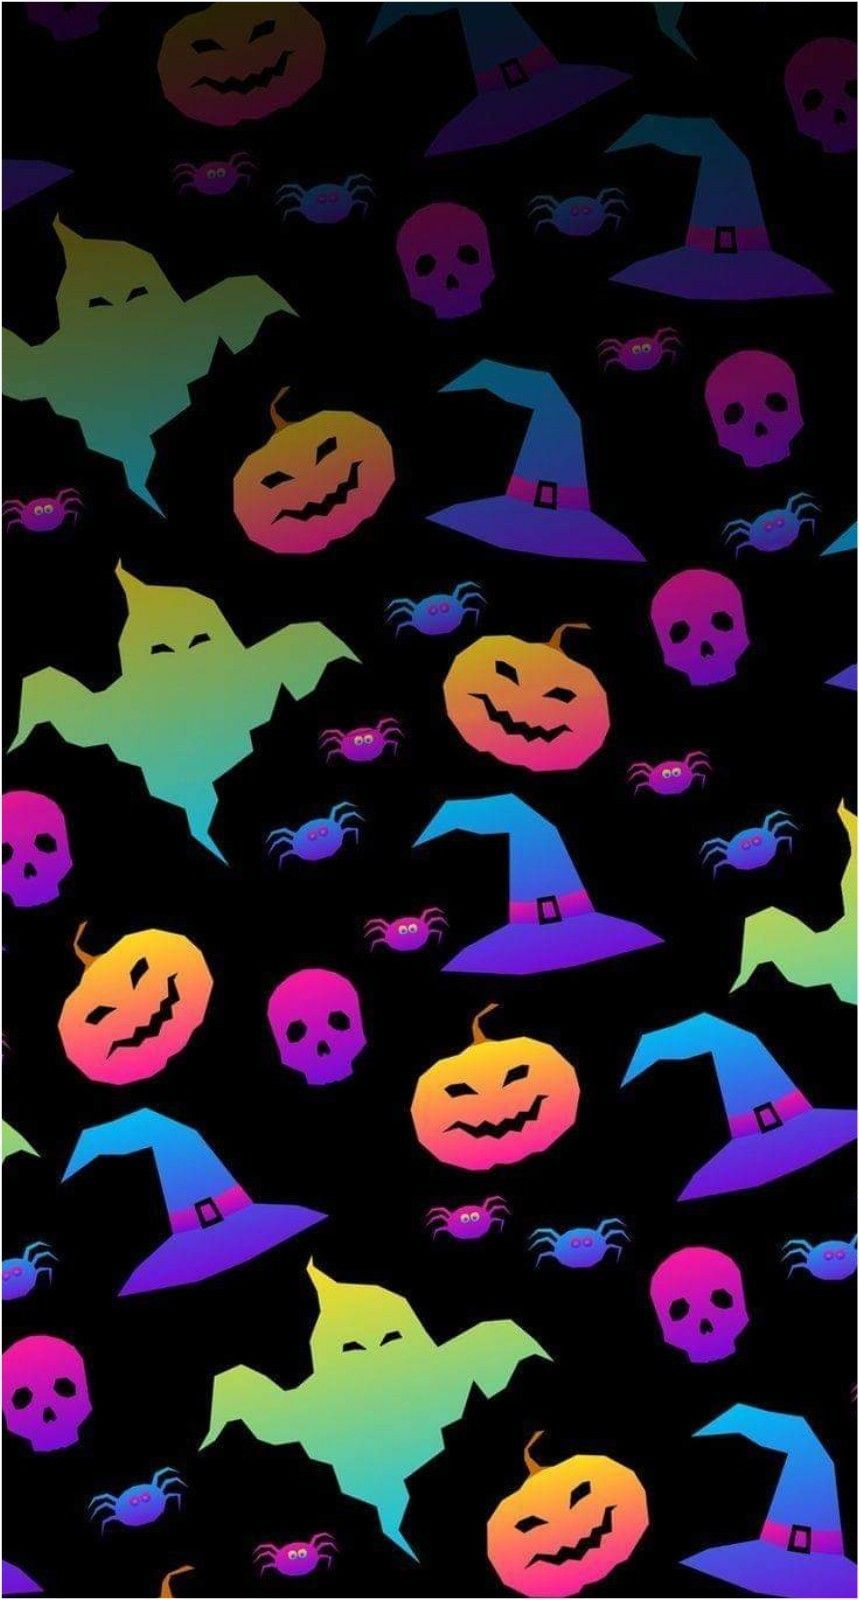 A halloween pattern with colorful pumpkins, ghosts and hats - Halloween, cute Halloween, spooky